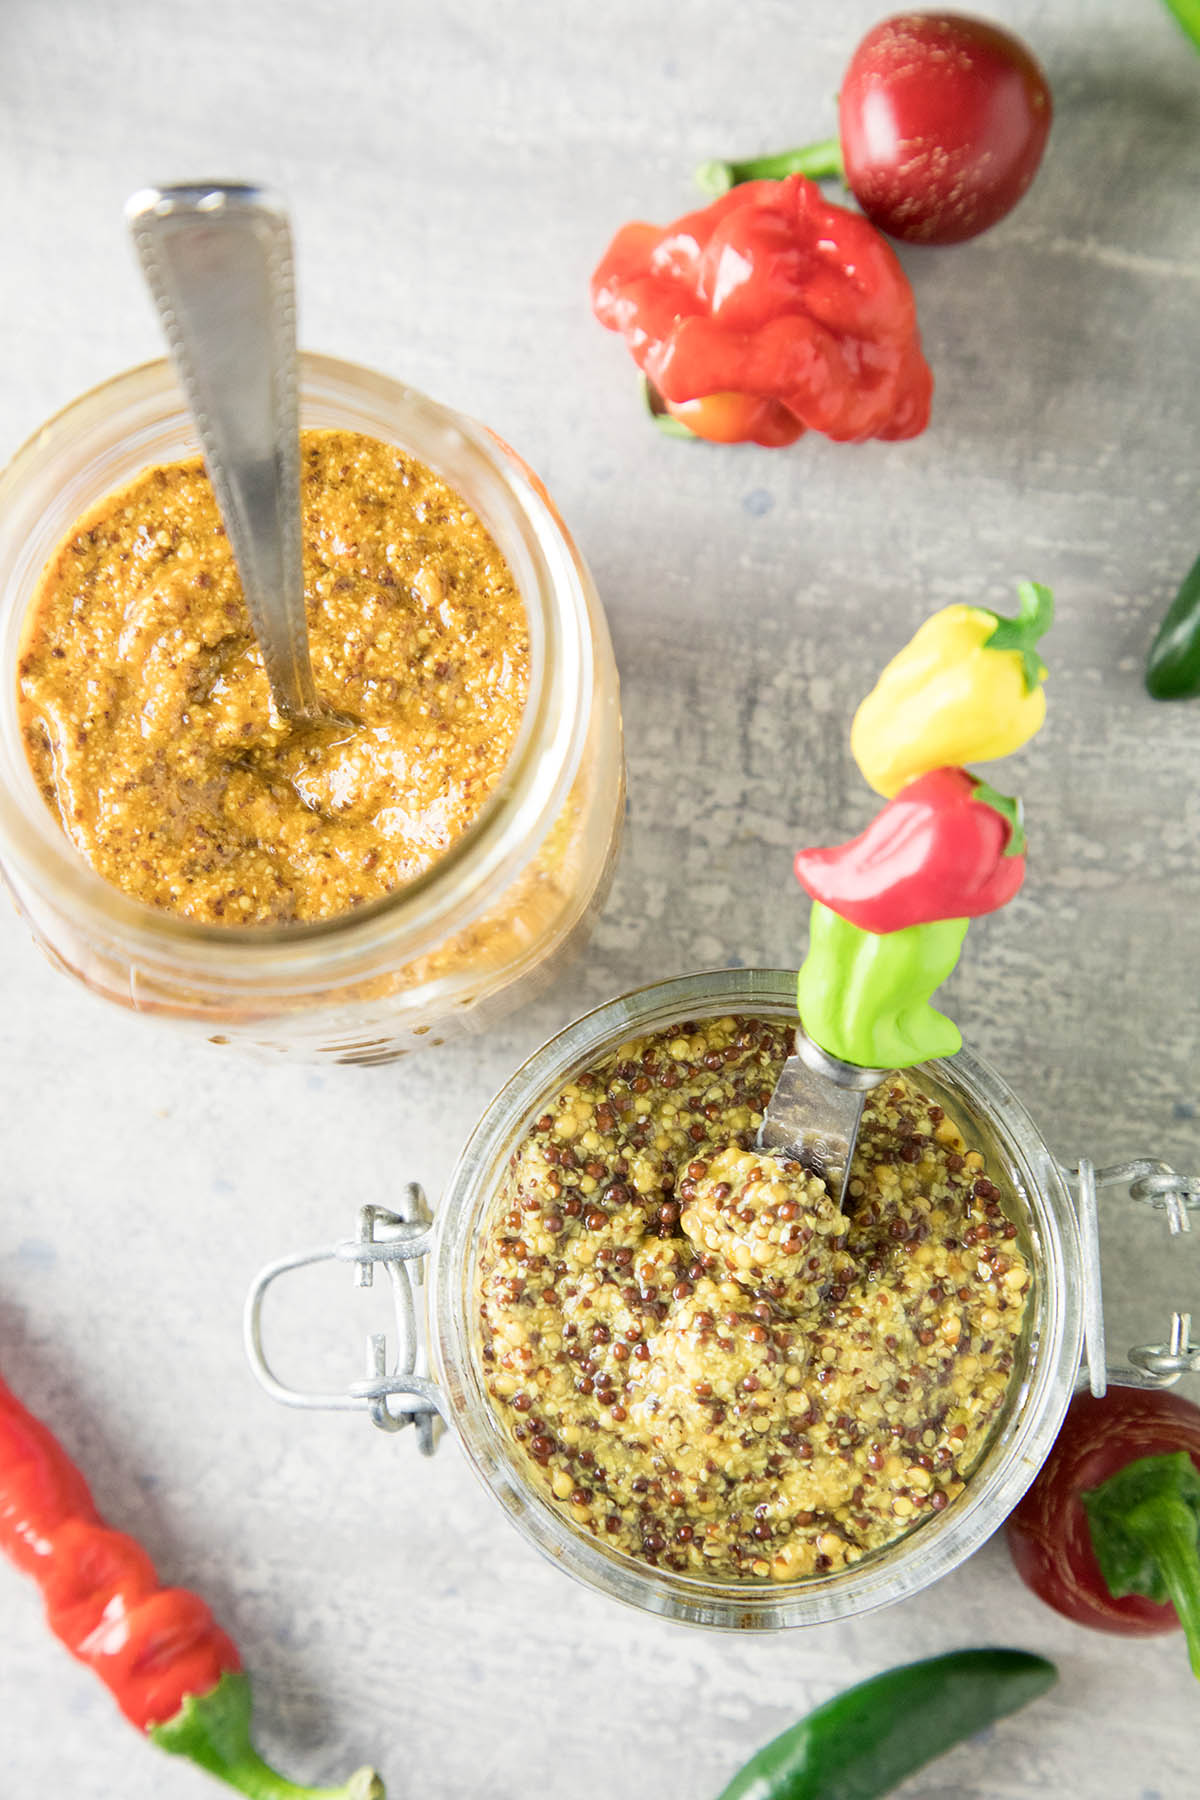 Homemade Mustards. You can make these at home with very few ingredients.